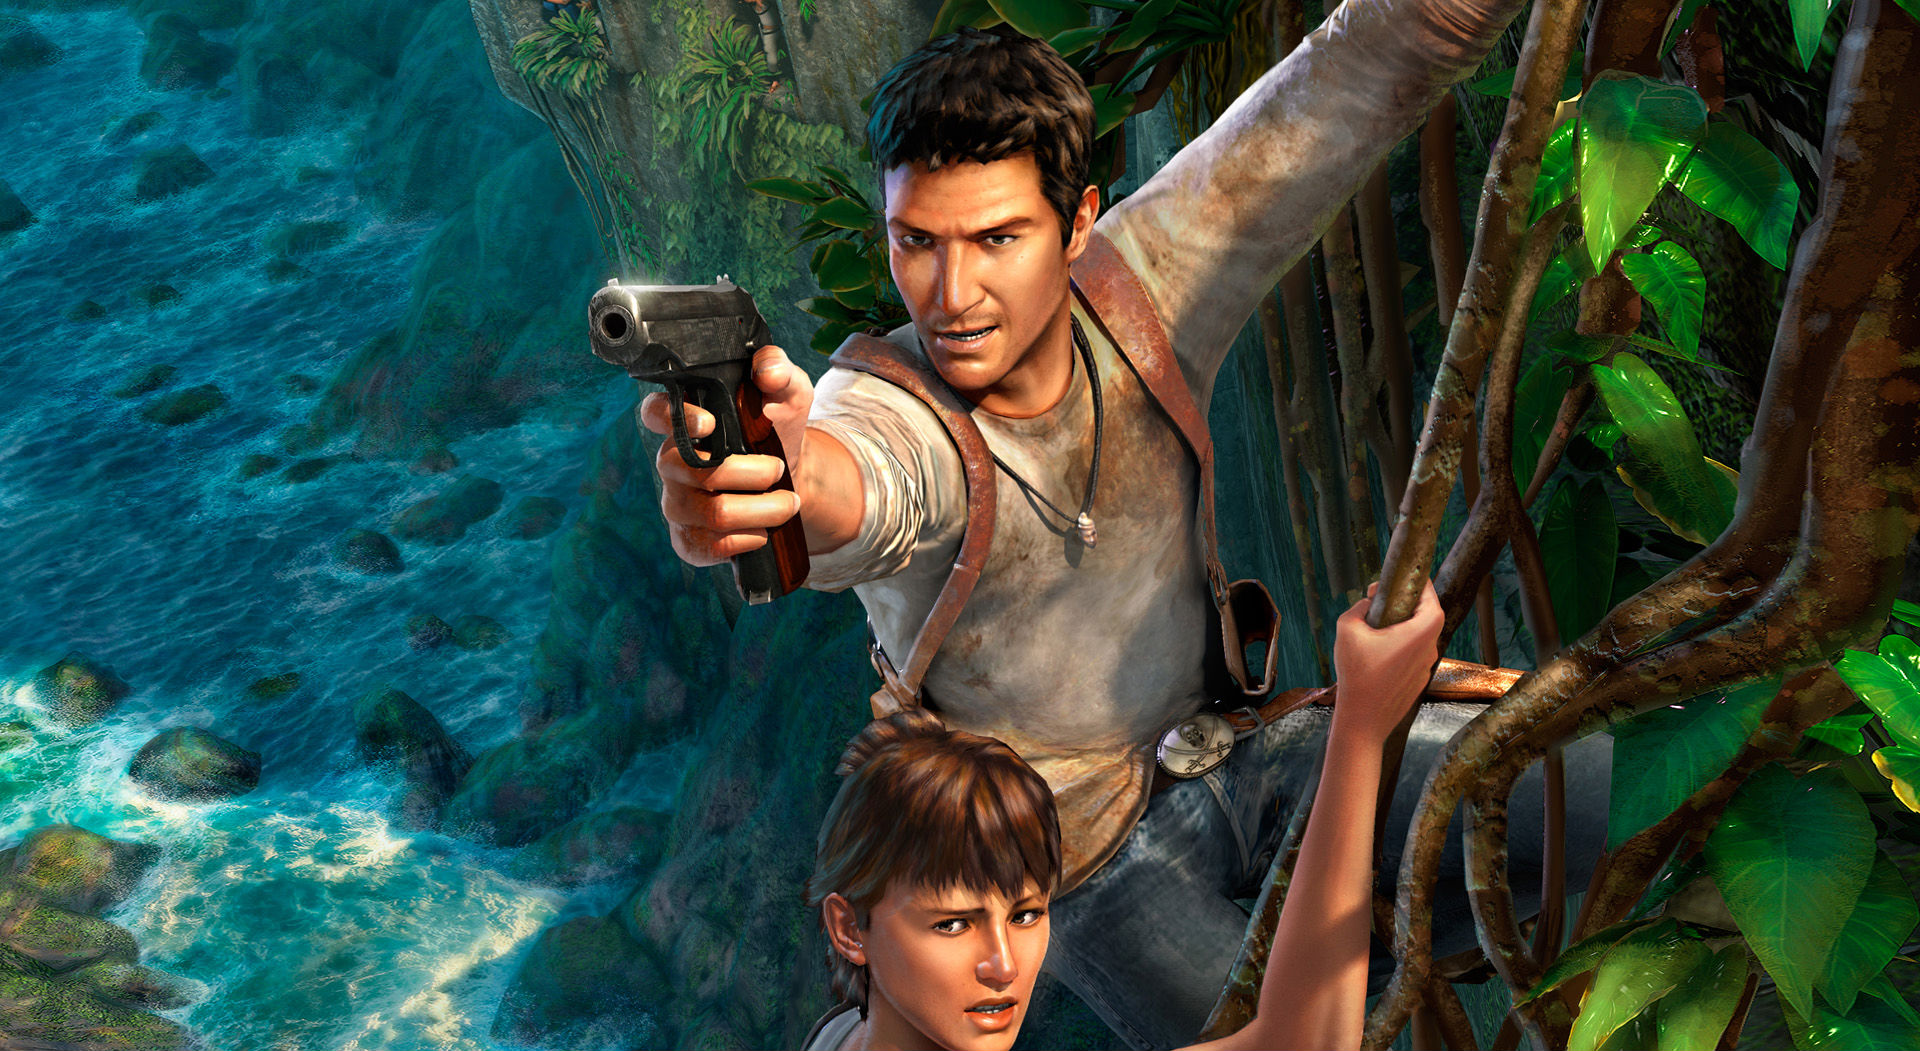 Video Game Uncharted: Drake's Fortune Wallpaper